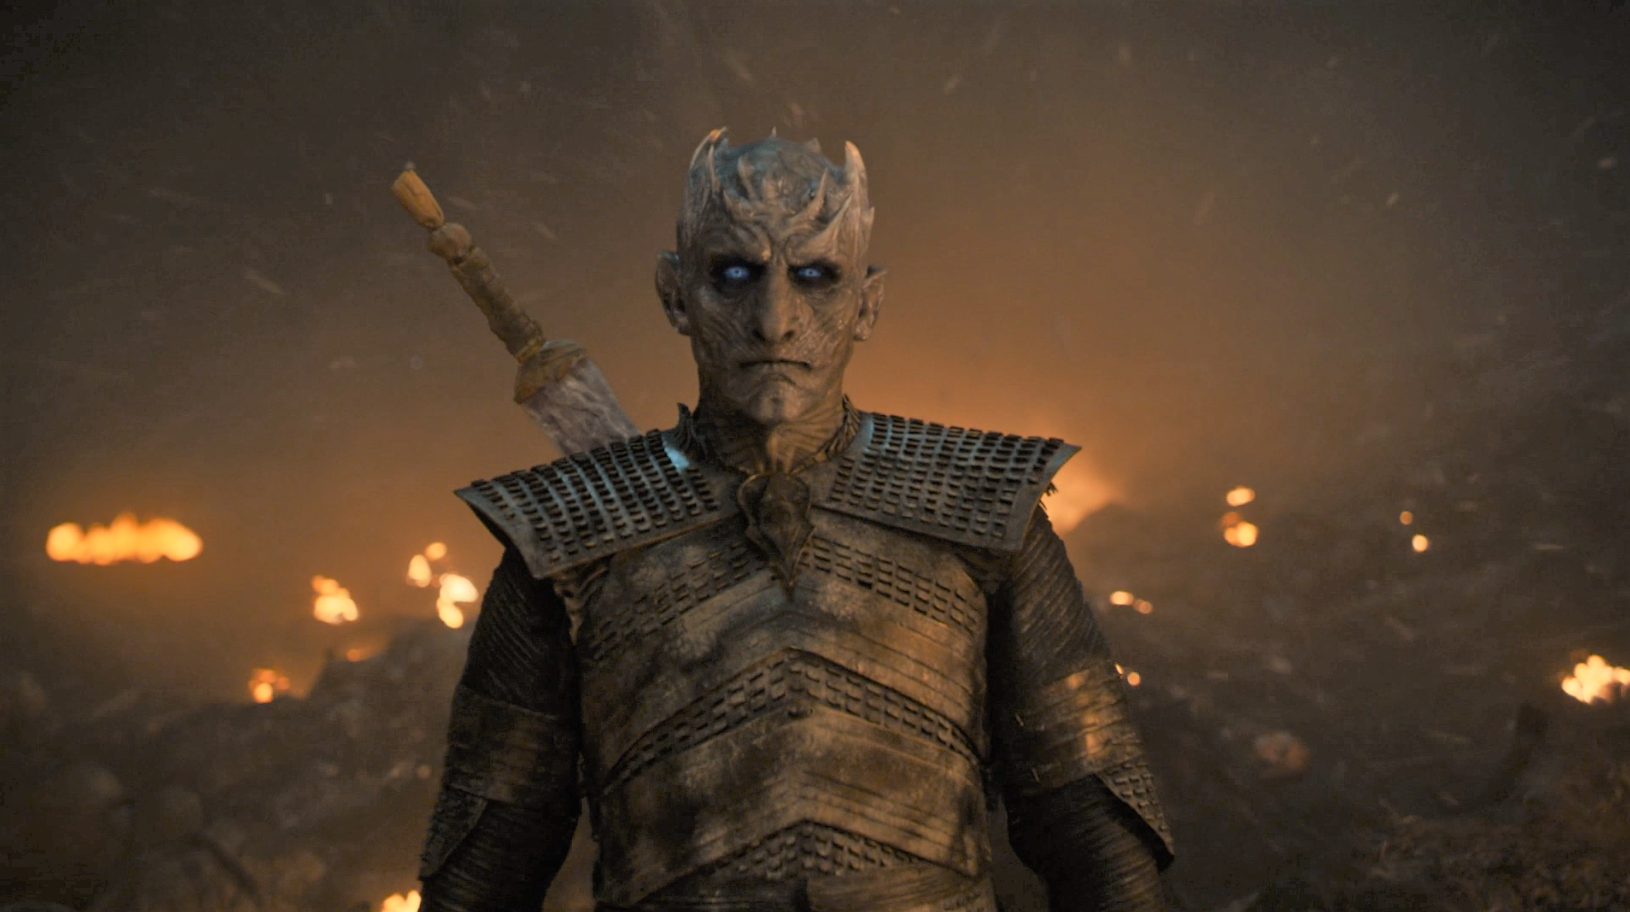 The Night King, Game of Thrones (2011-2019)